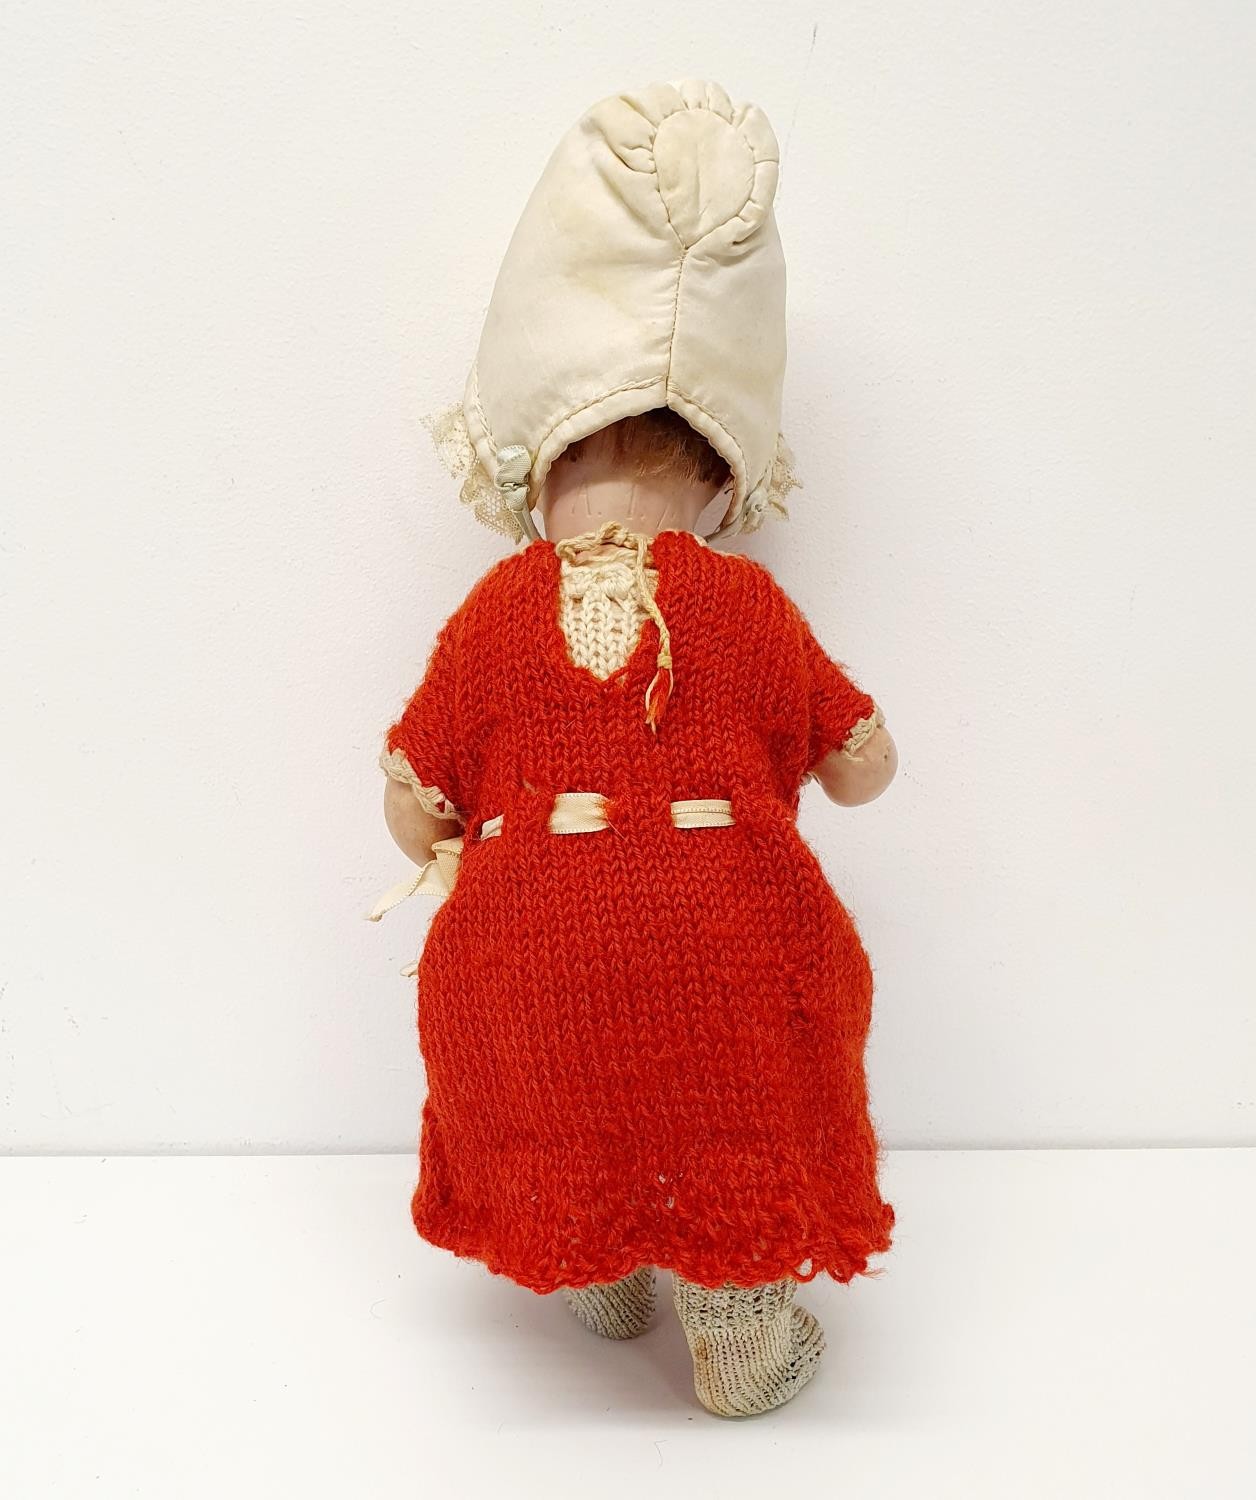 An Armand Marseille German bisque headed baby doll, No 990, a composite body, and millefiori glass - Image 2 of 3